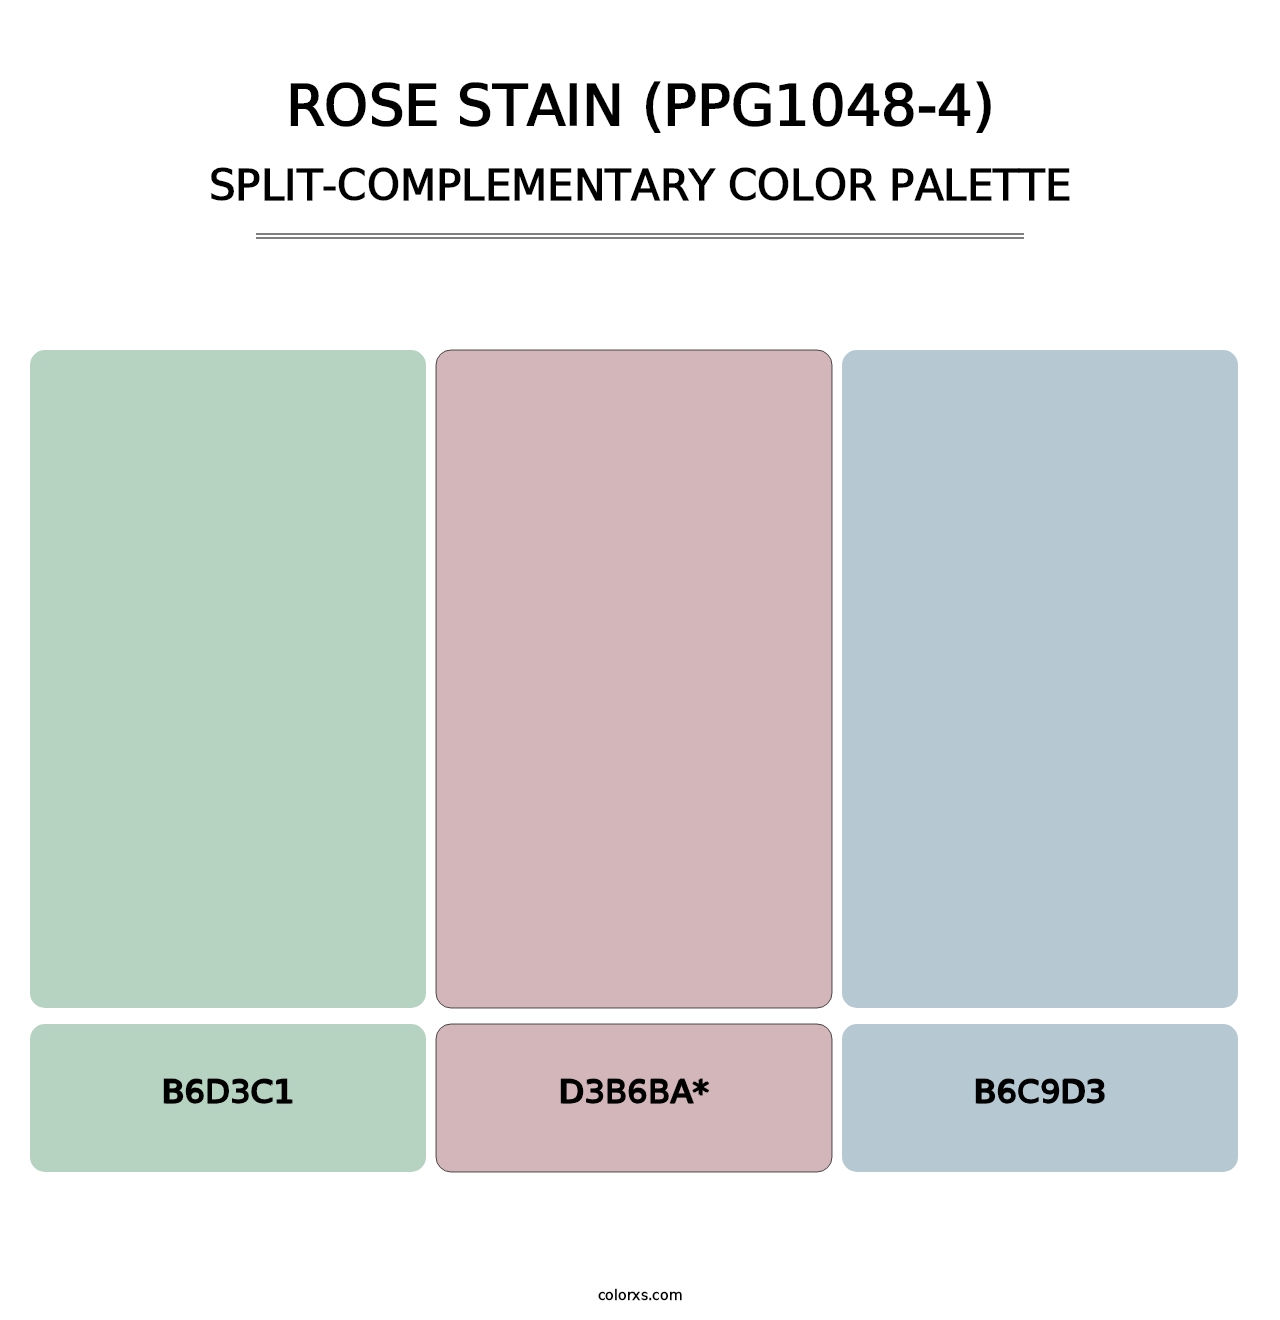 Rose Stain (PPG1048-4) - Split-Complementary Color Palette